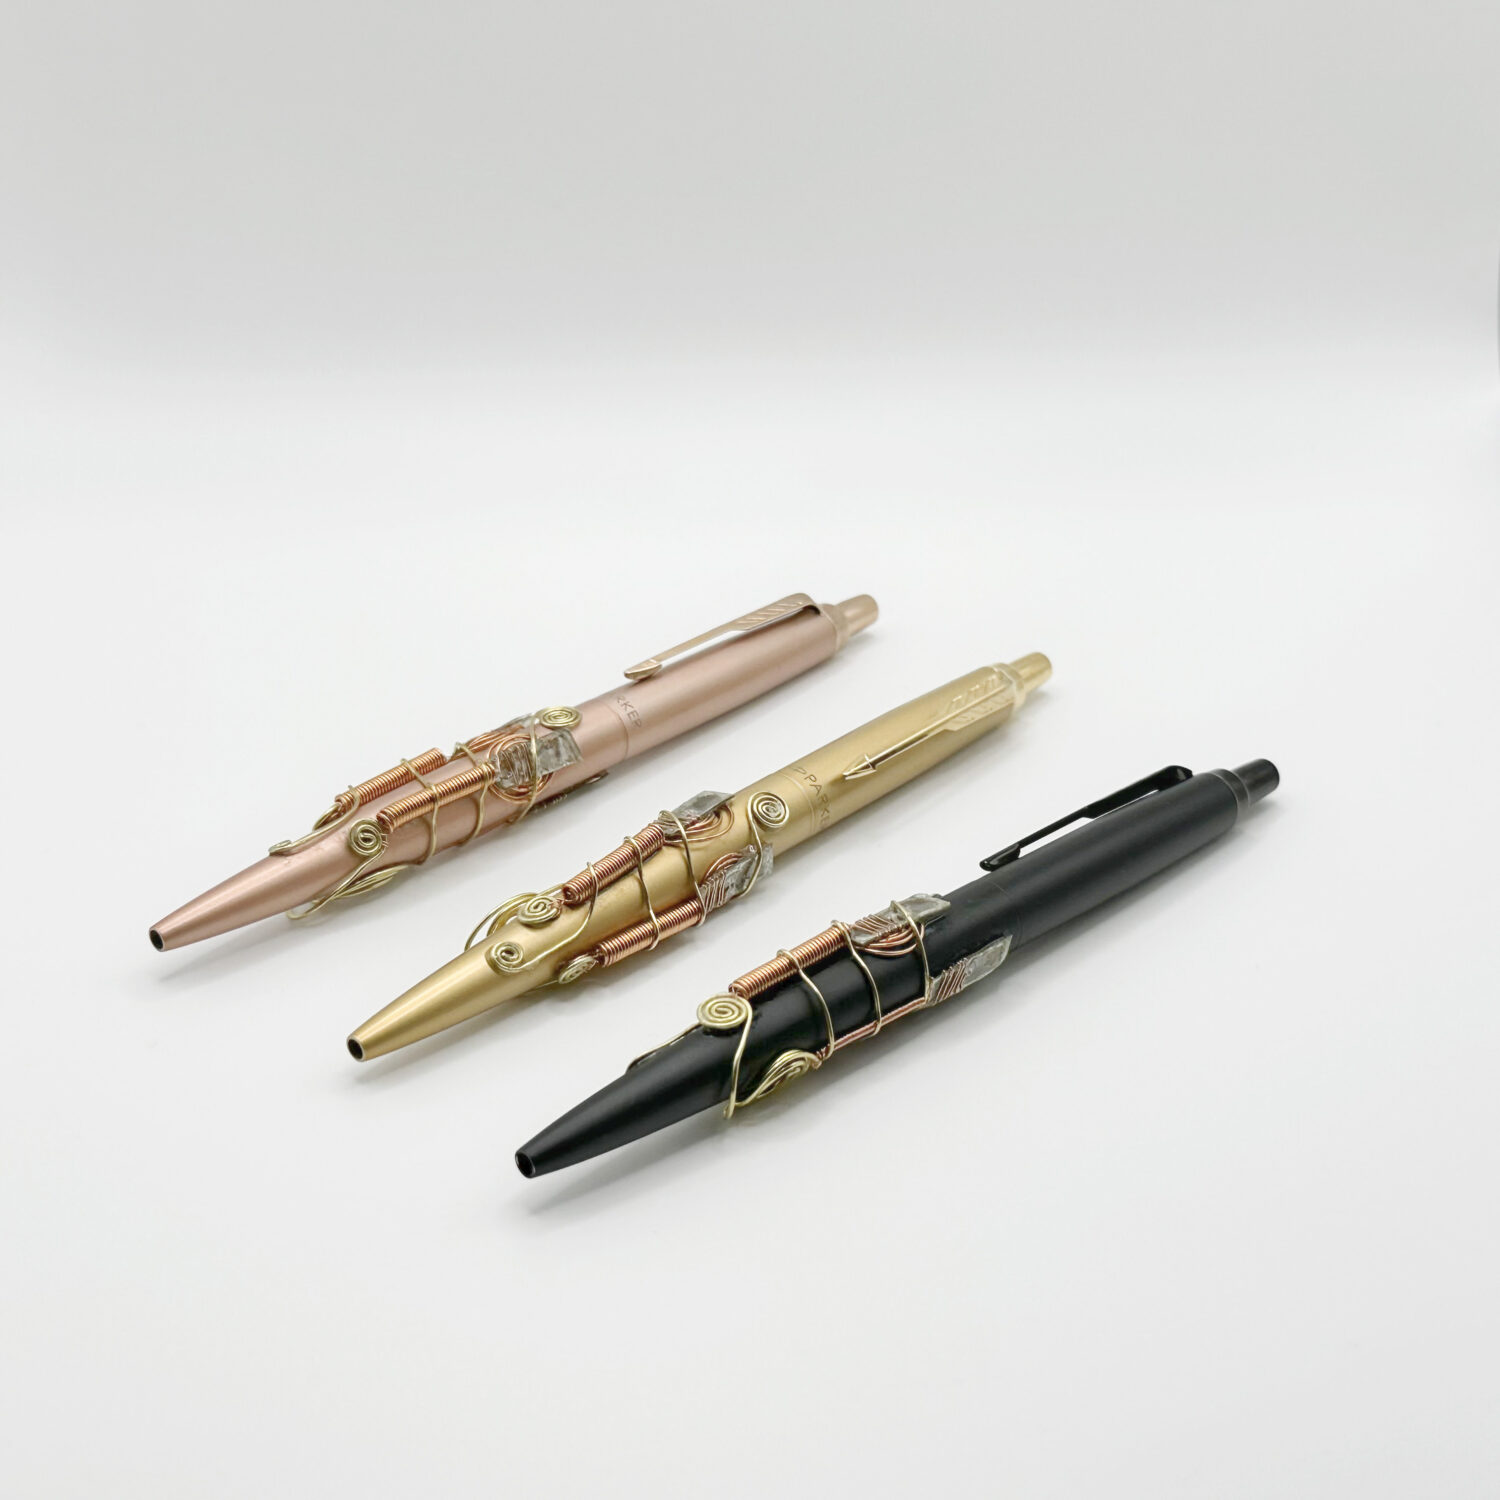 Selfica pen for automatic writing